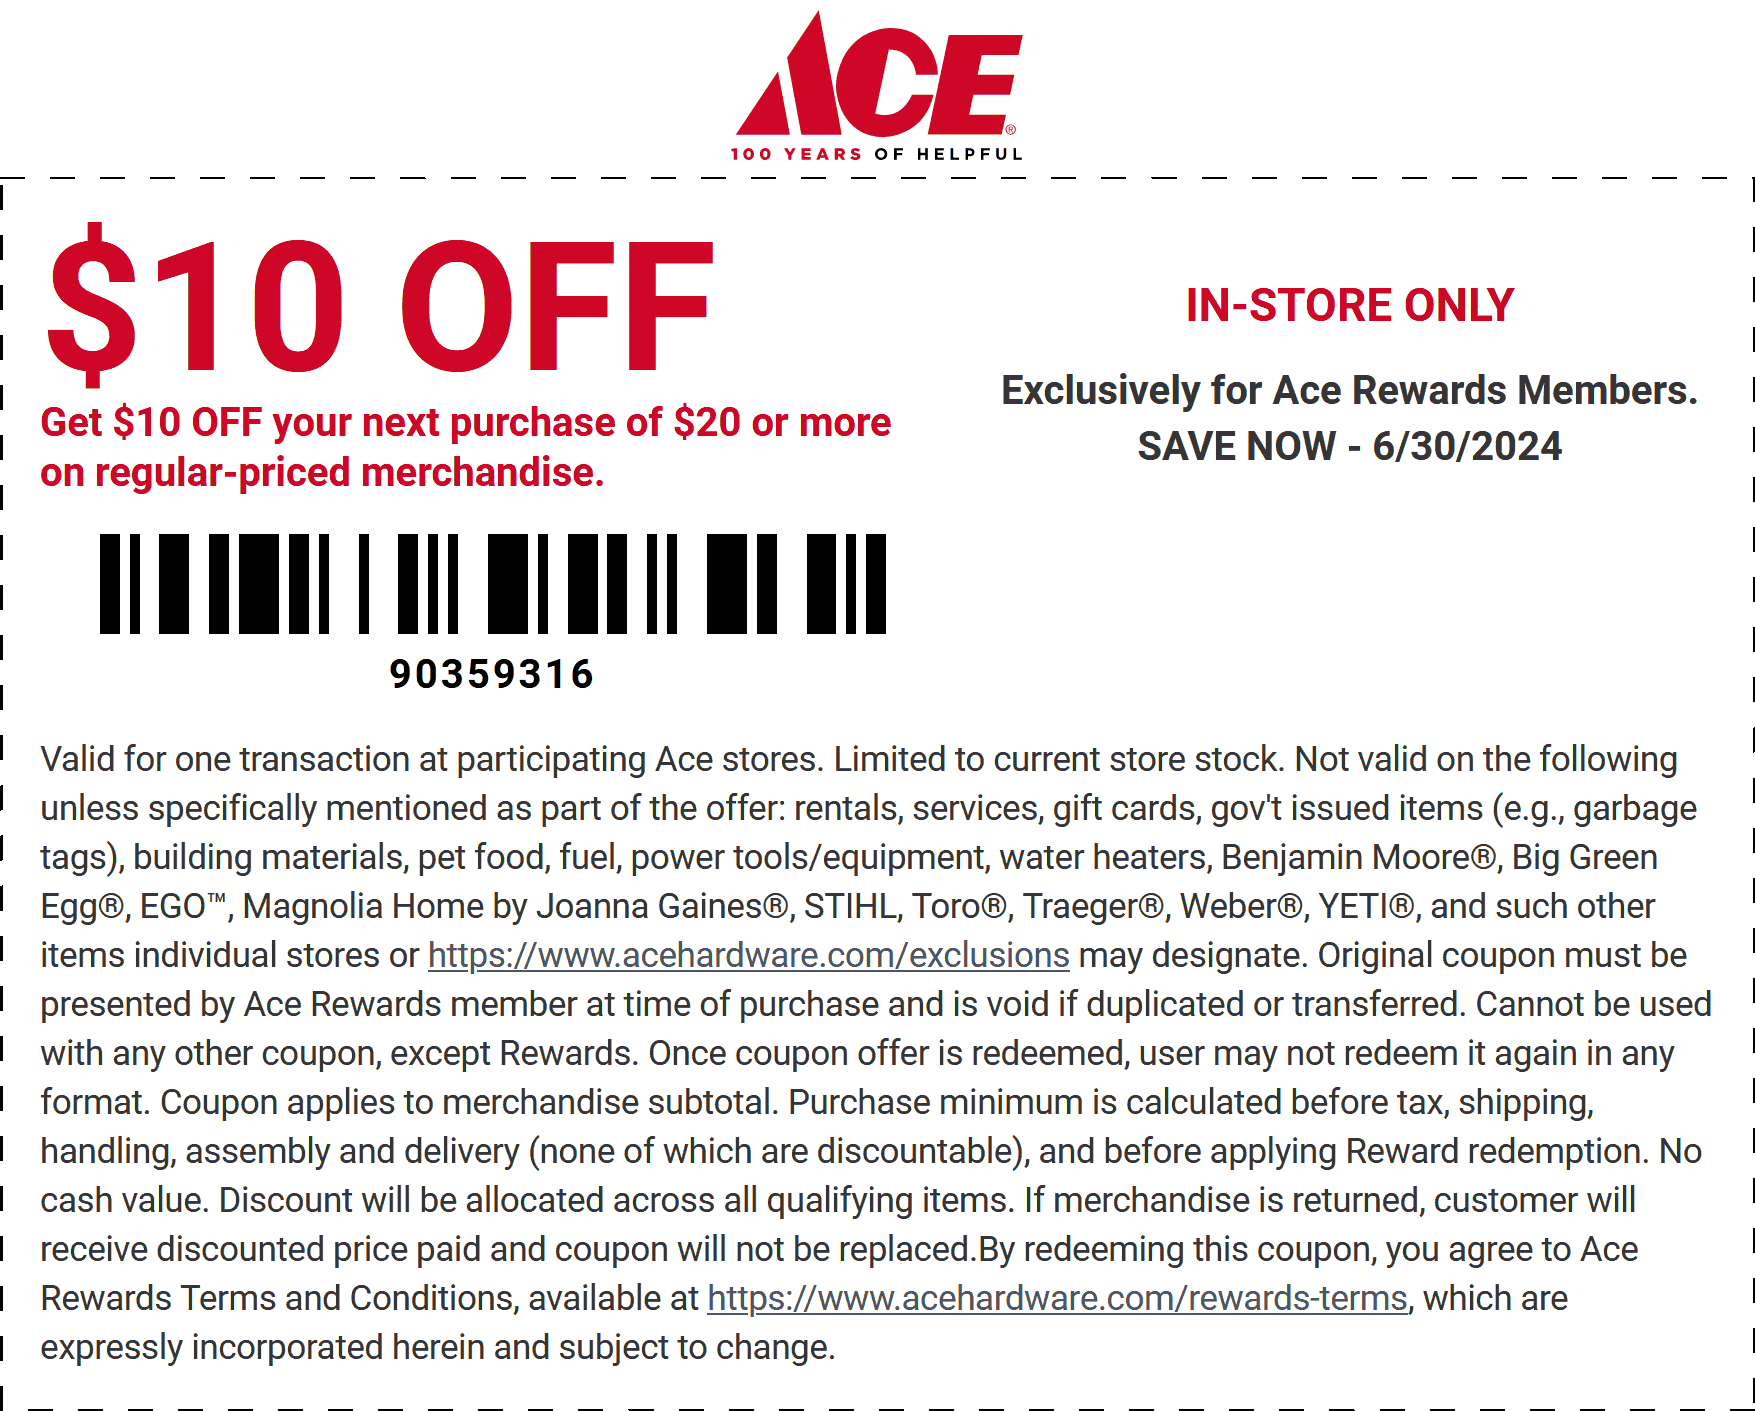 Ace Hardware stores Coupon  $10 off $20 at Ace Hardware #acehardware 